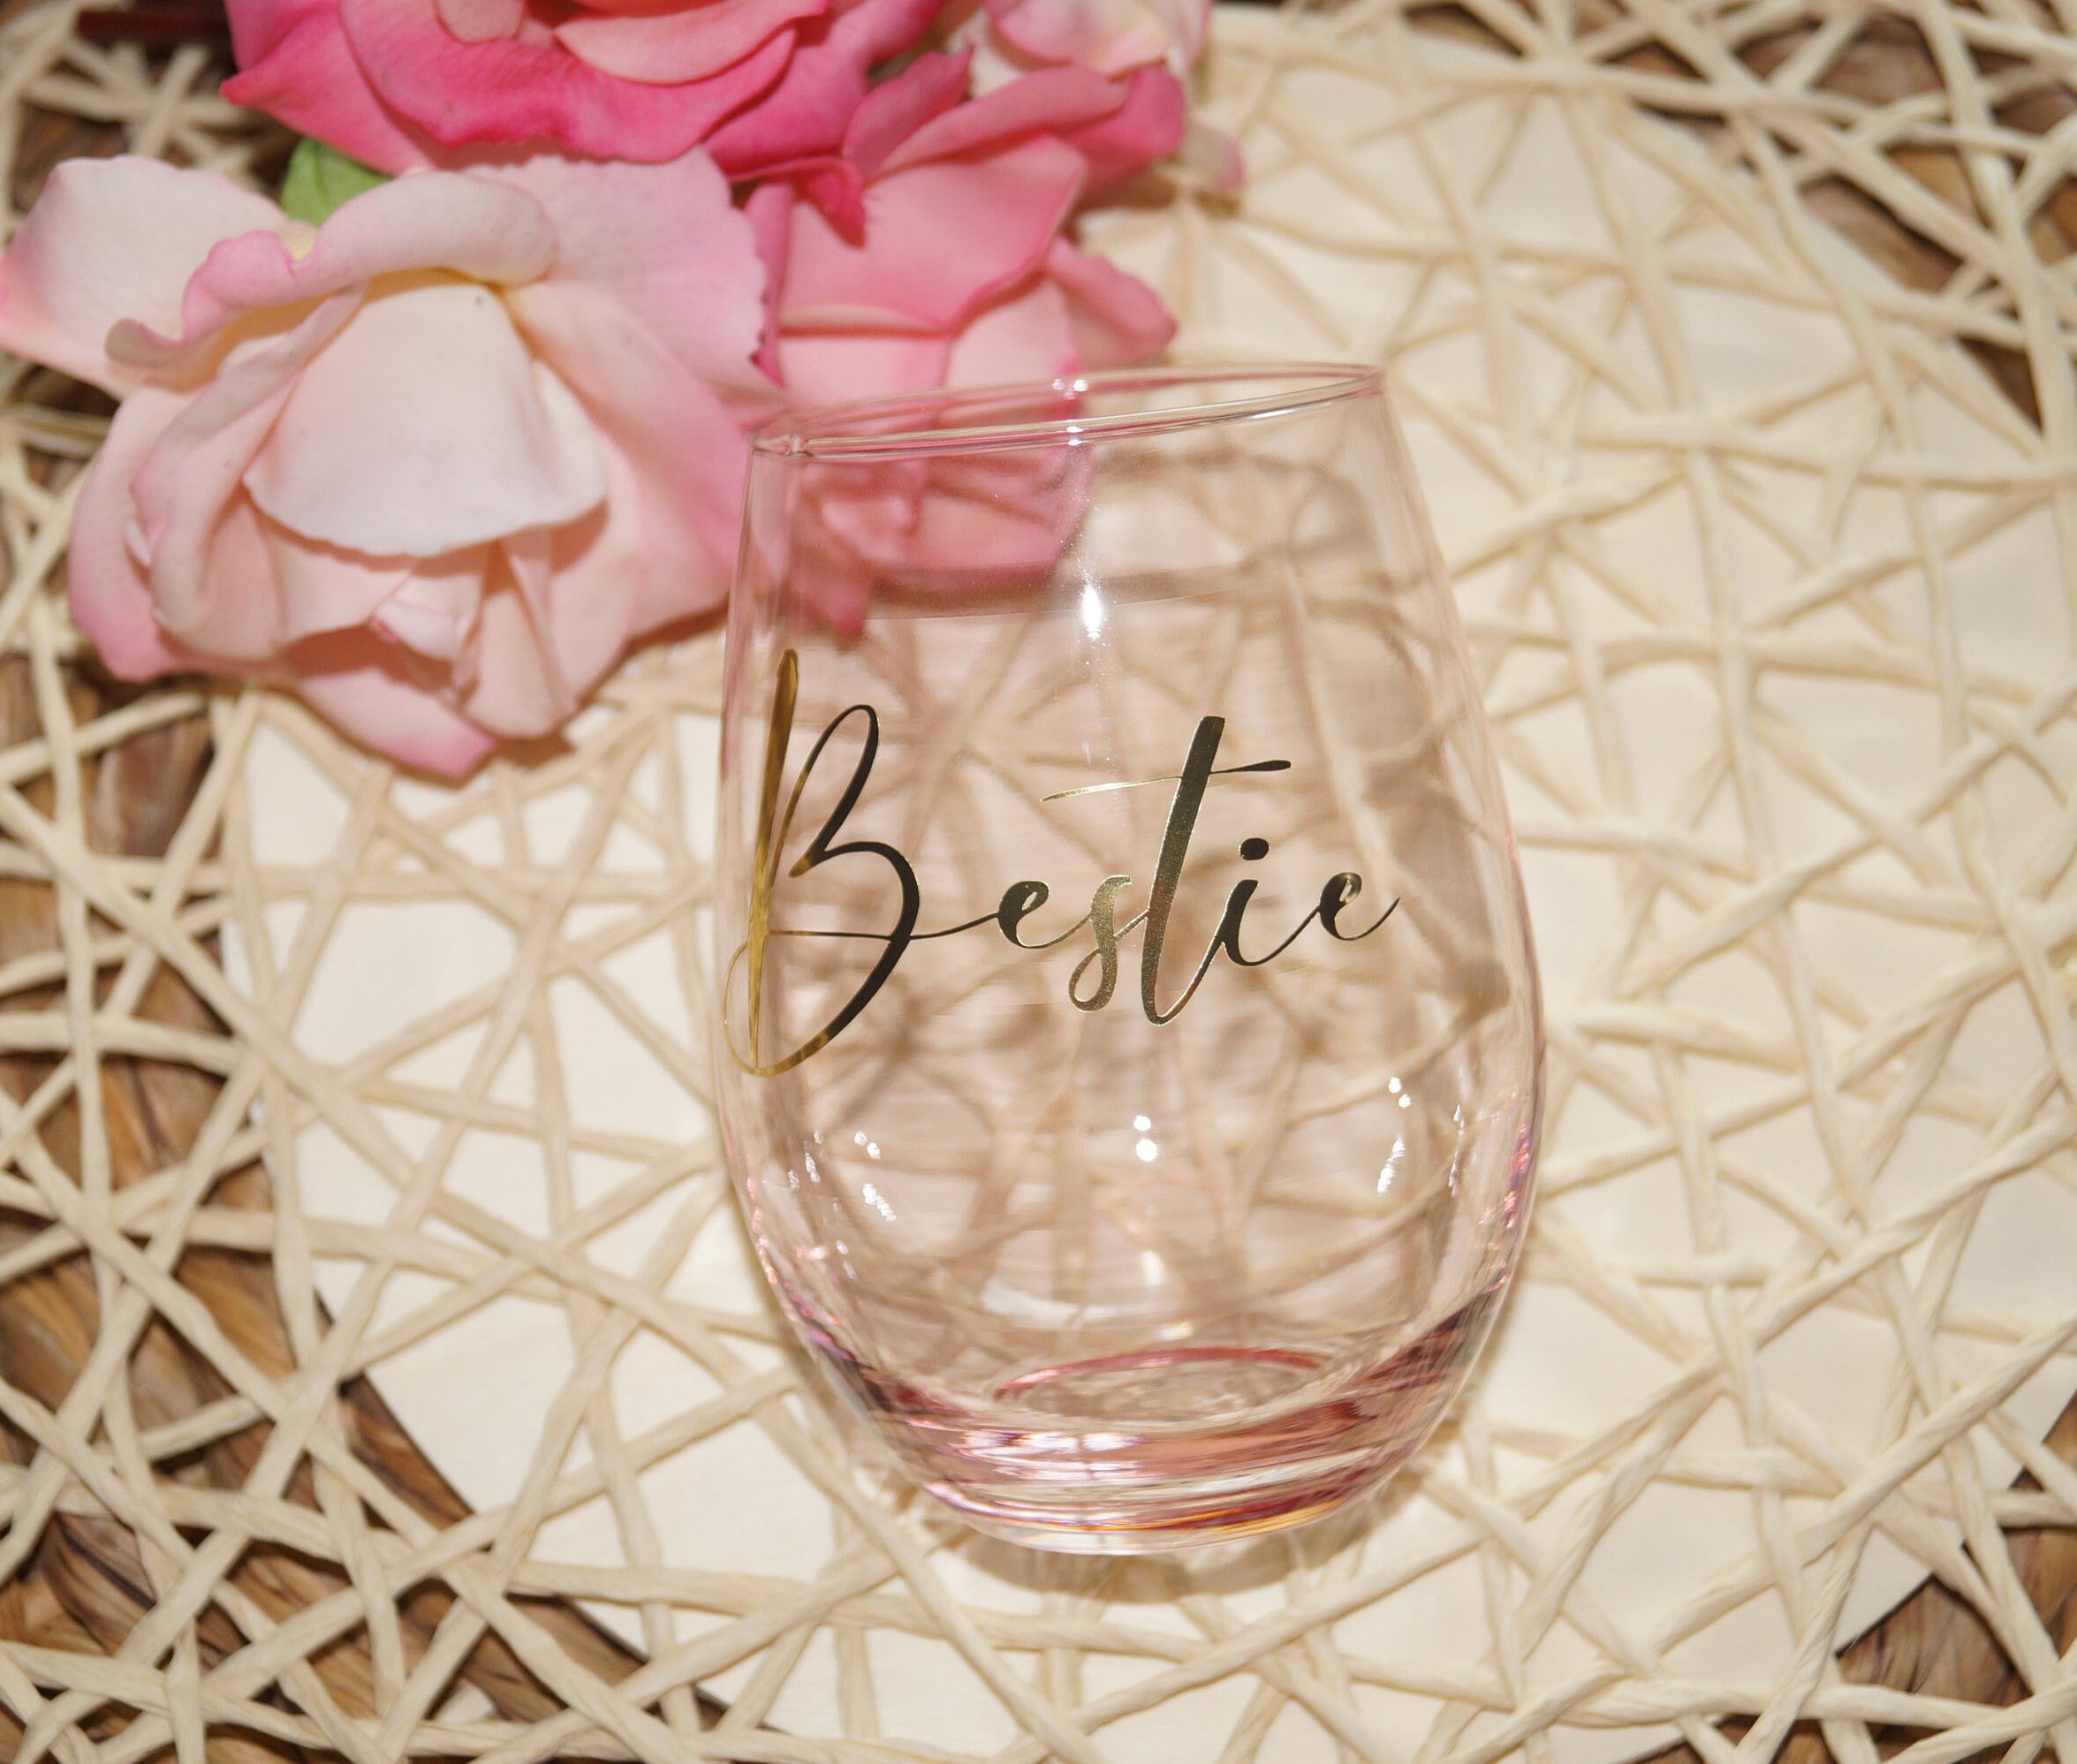 40th Birthday Gifts for Women, Birthday Wine Glass, Funny Gifts